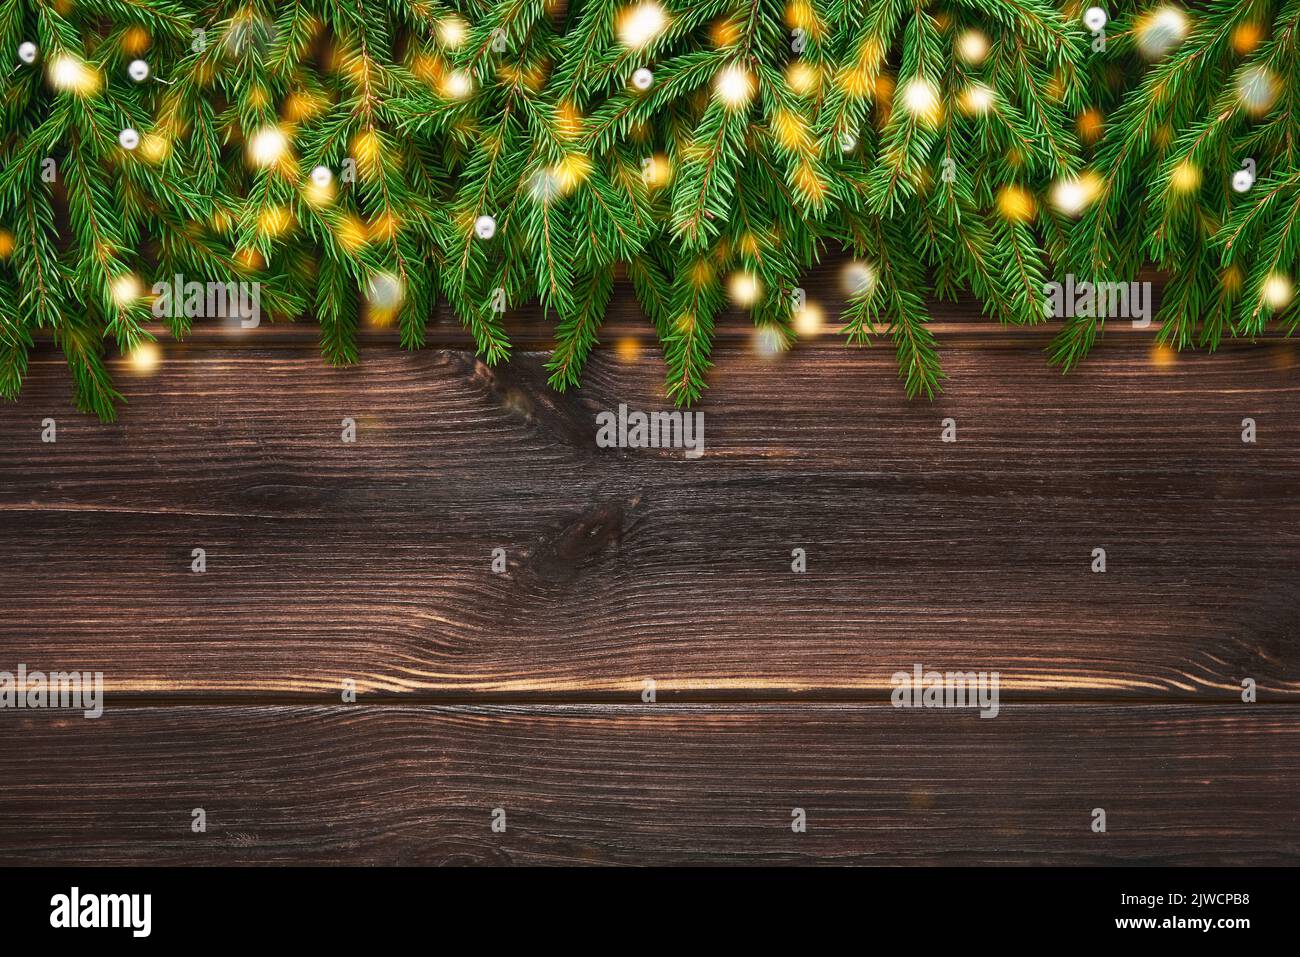 Christmas background. Christmas decoration, fir tree branches on a dark wooden background. Top view, copy space for text. Stock Photo